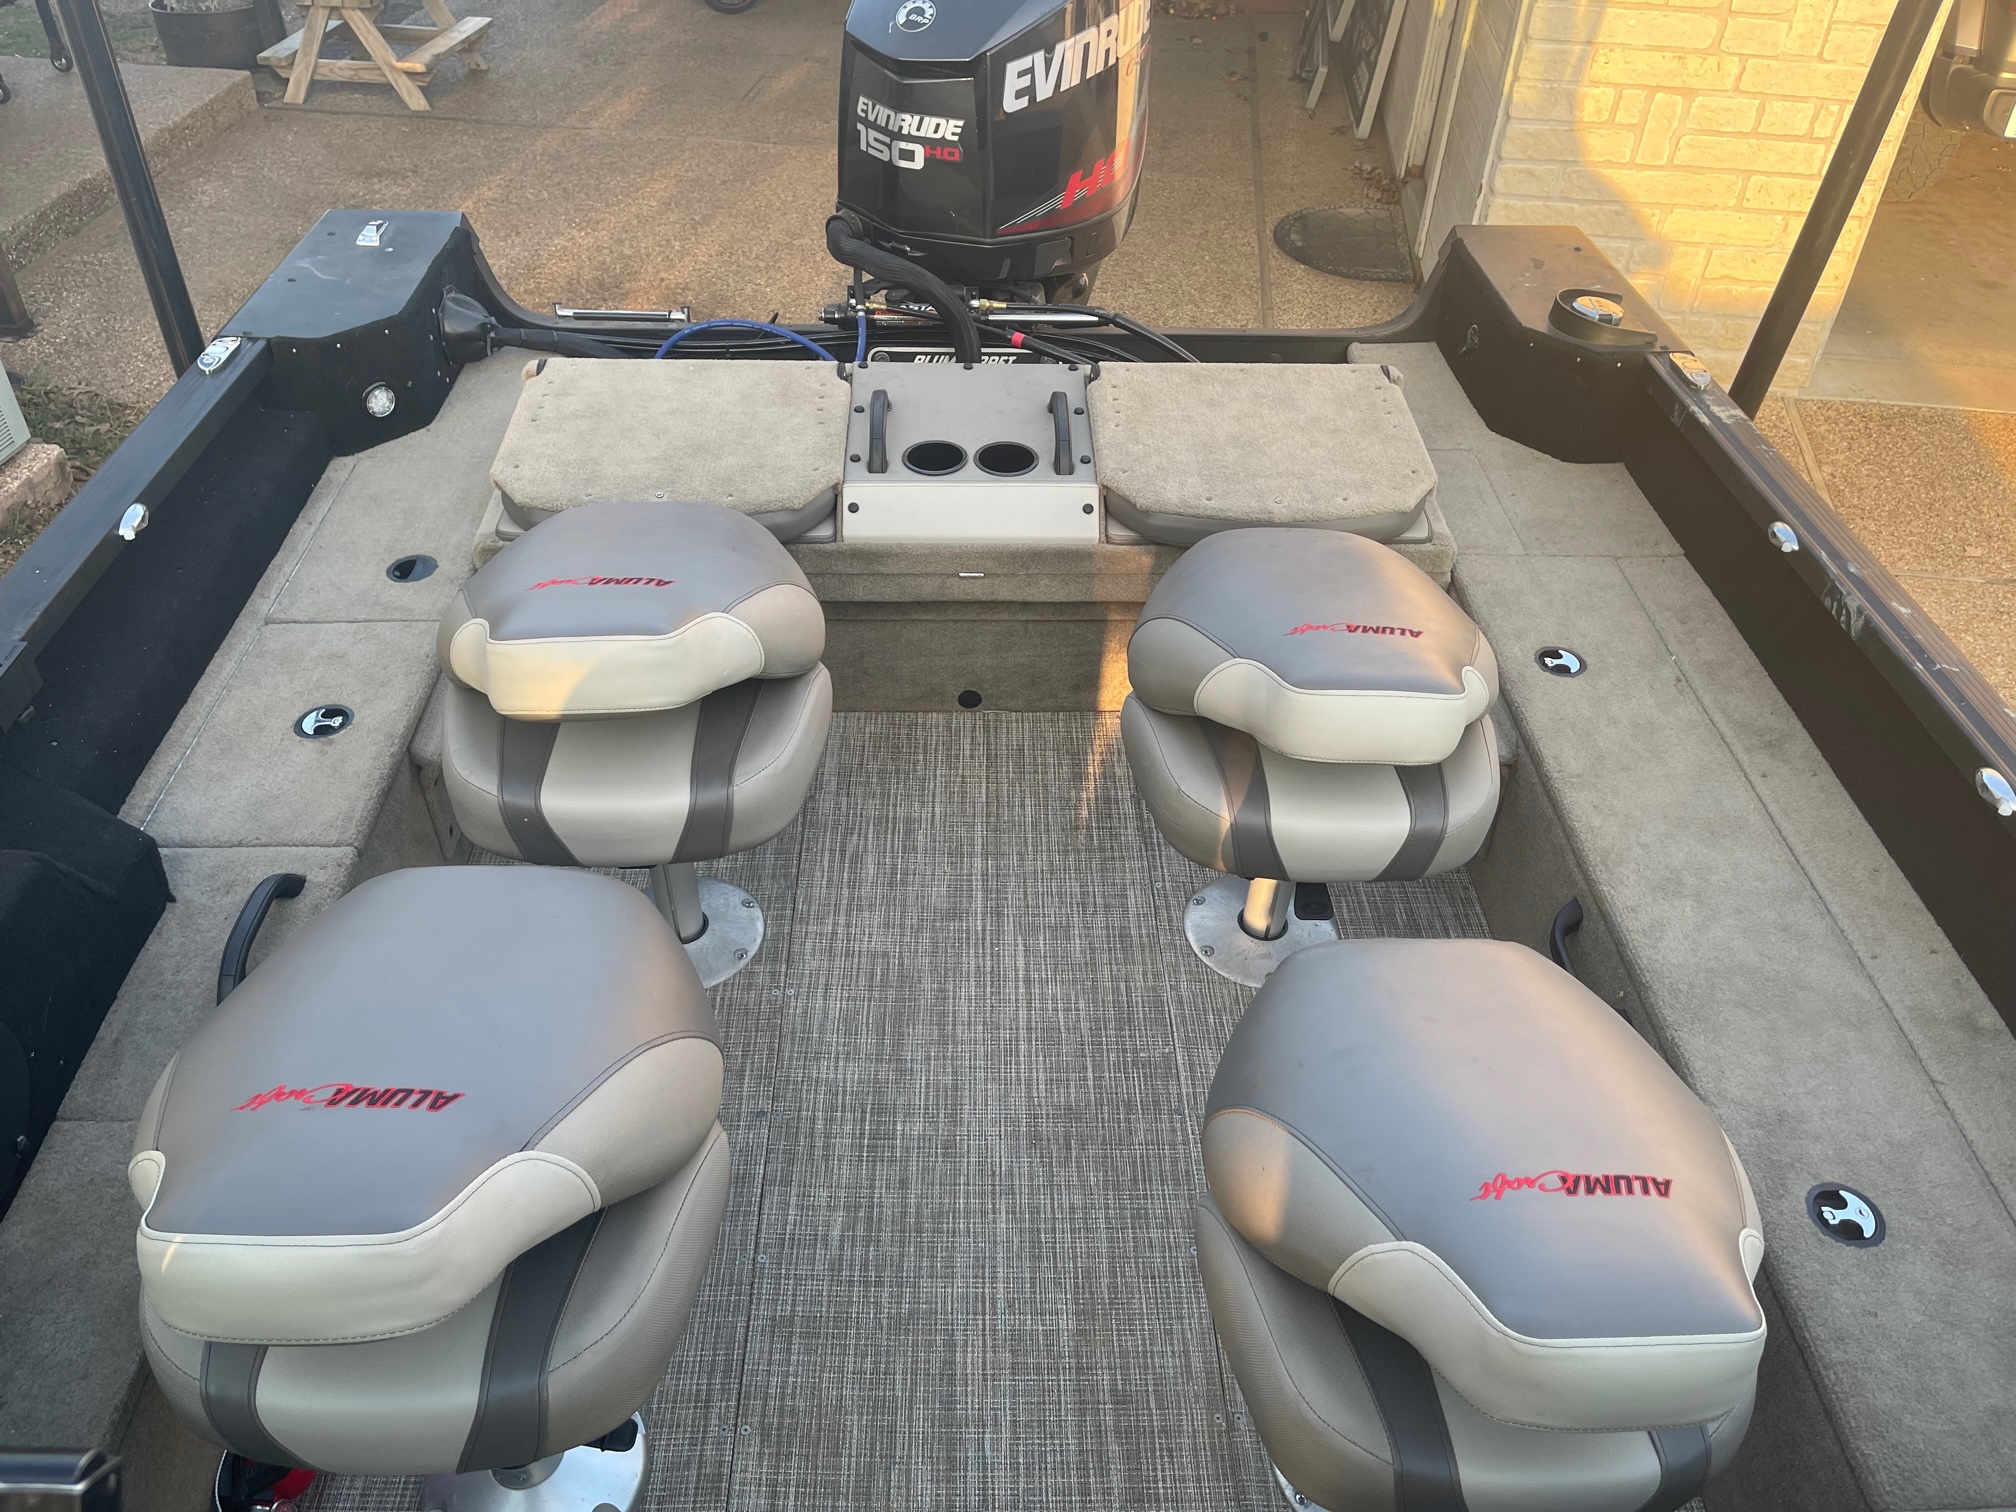 2020 Alumacraft 205 Competitor Power boat for sale in Waco, TX - image 2 